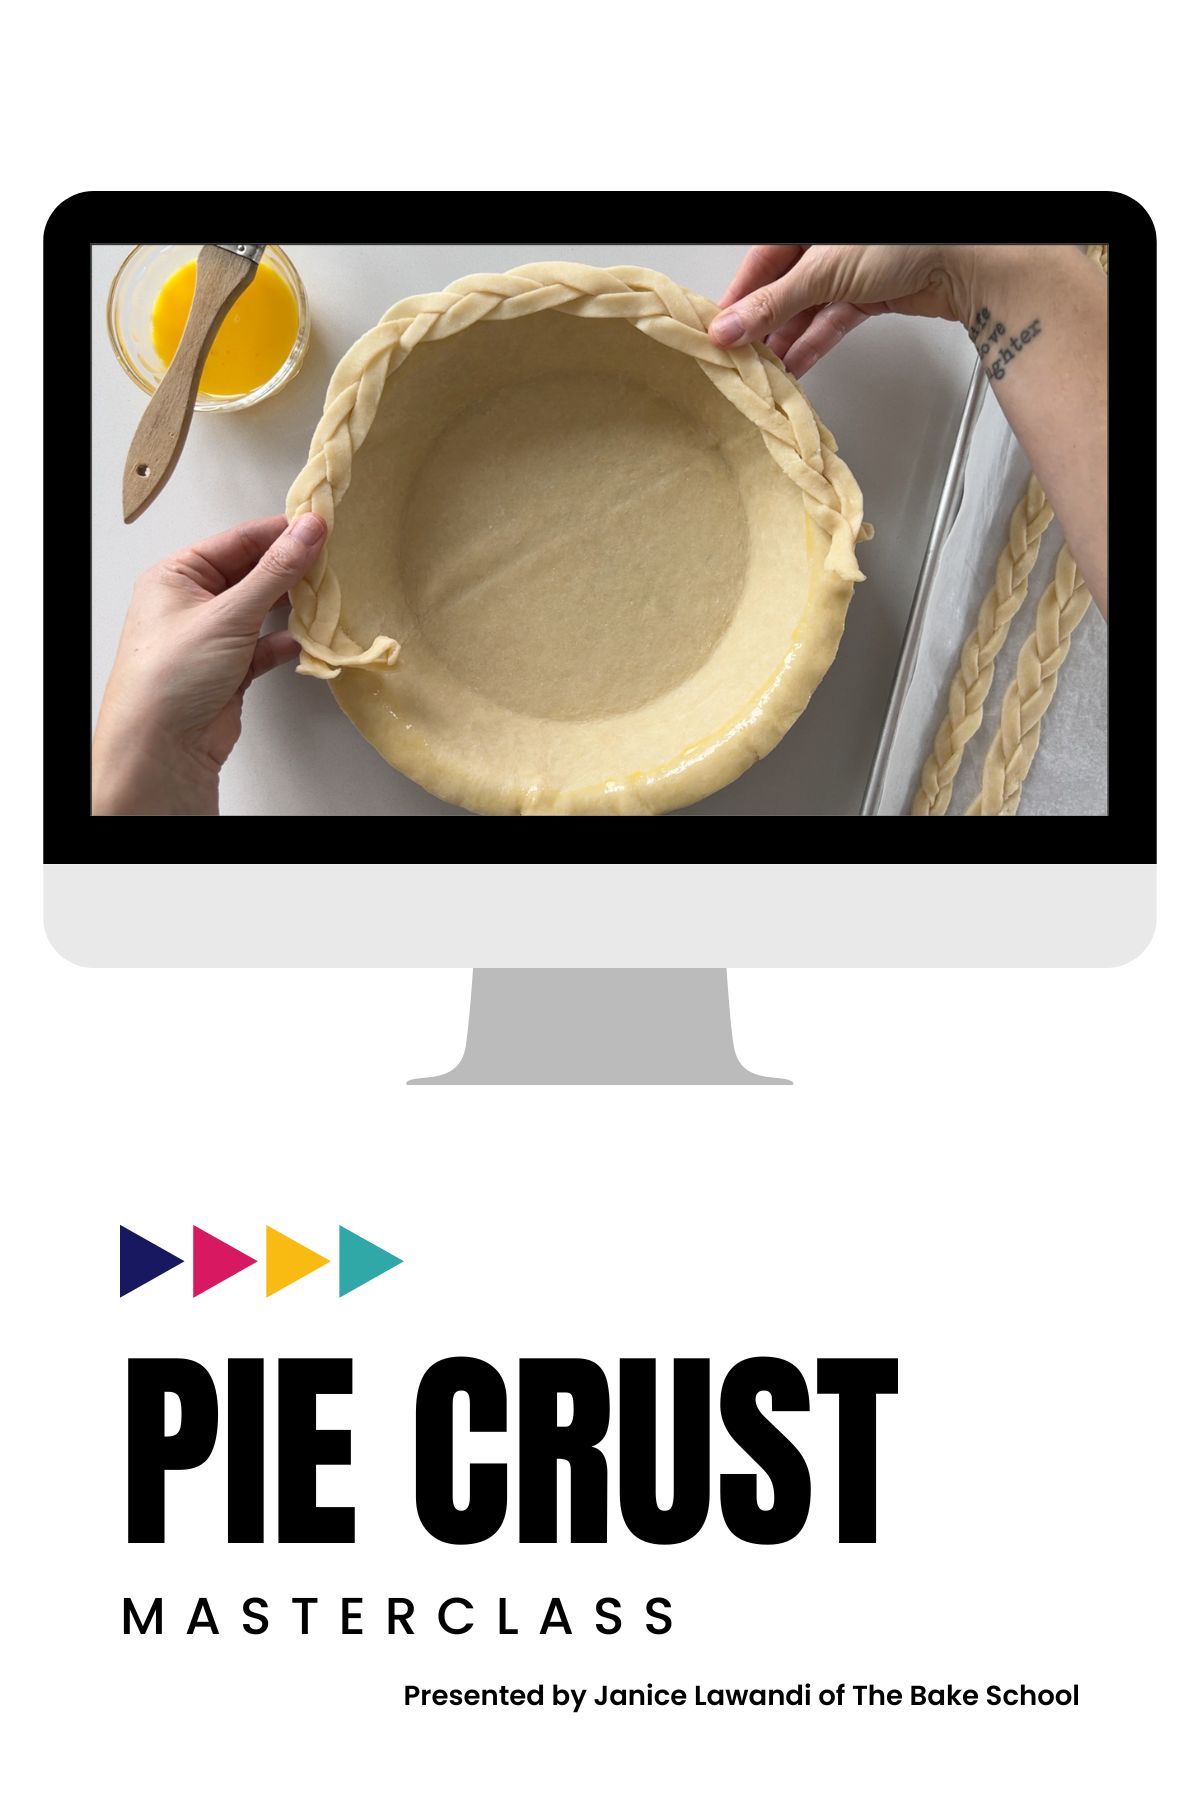 Computer screen showing image of adding a braided edge to an unbaked pie crust.